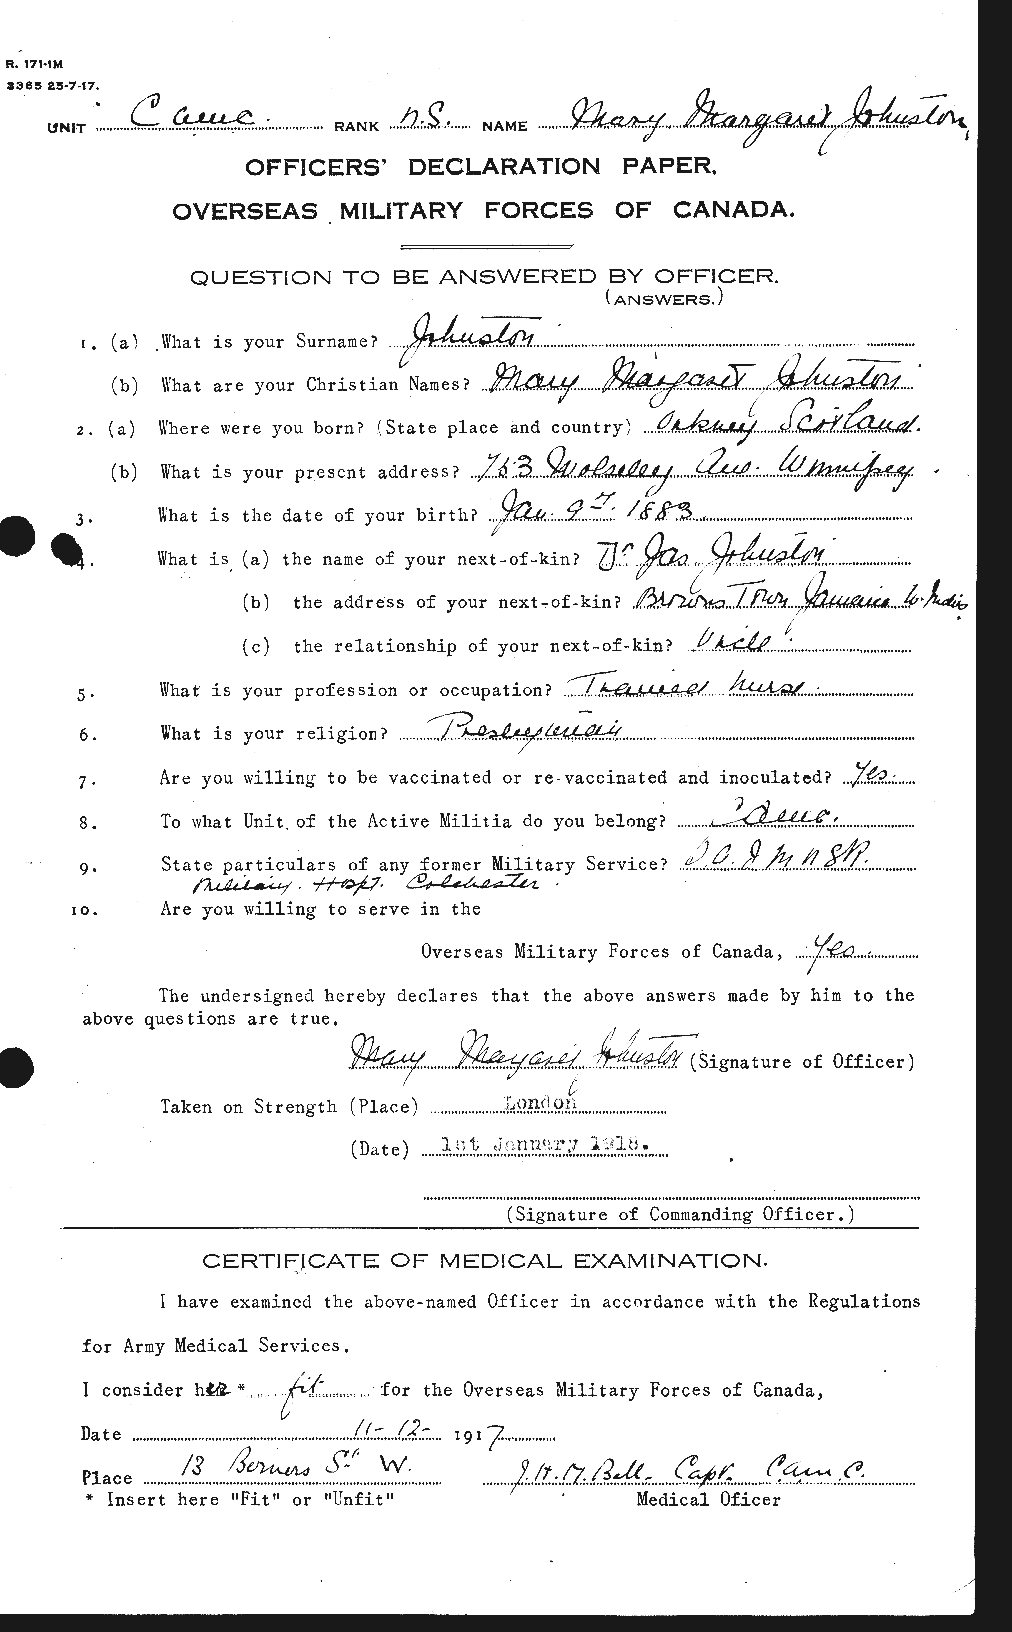 Personnel Records of the First World War - CEF 422976a